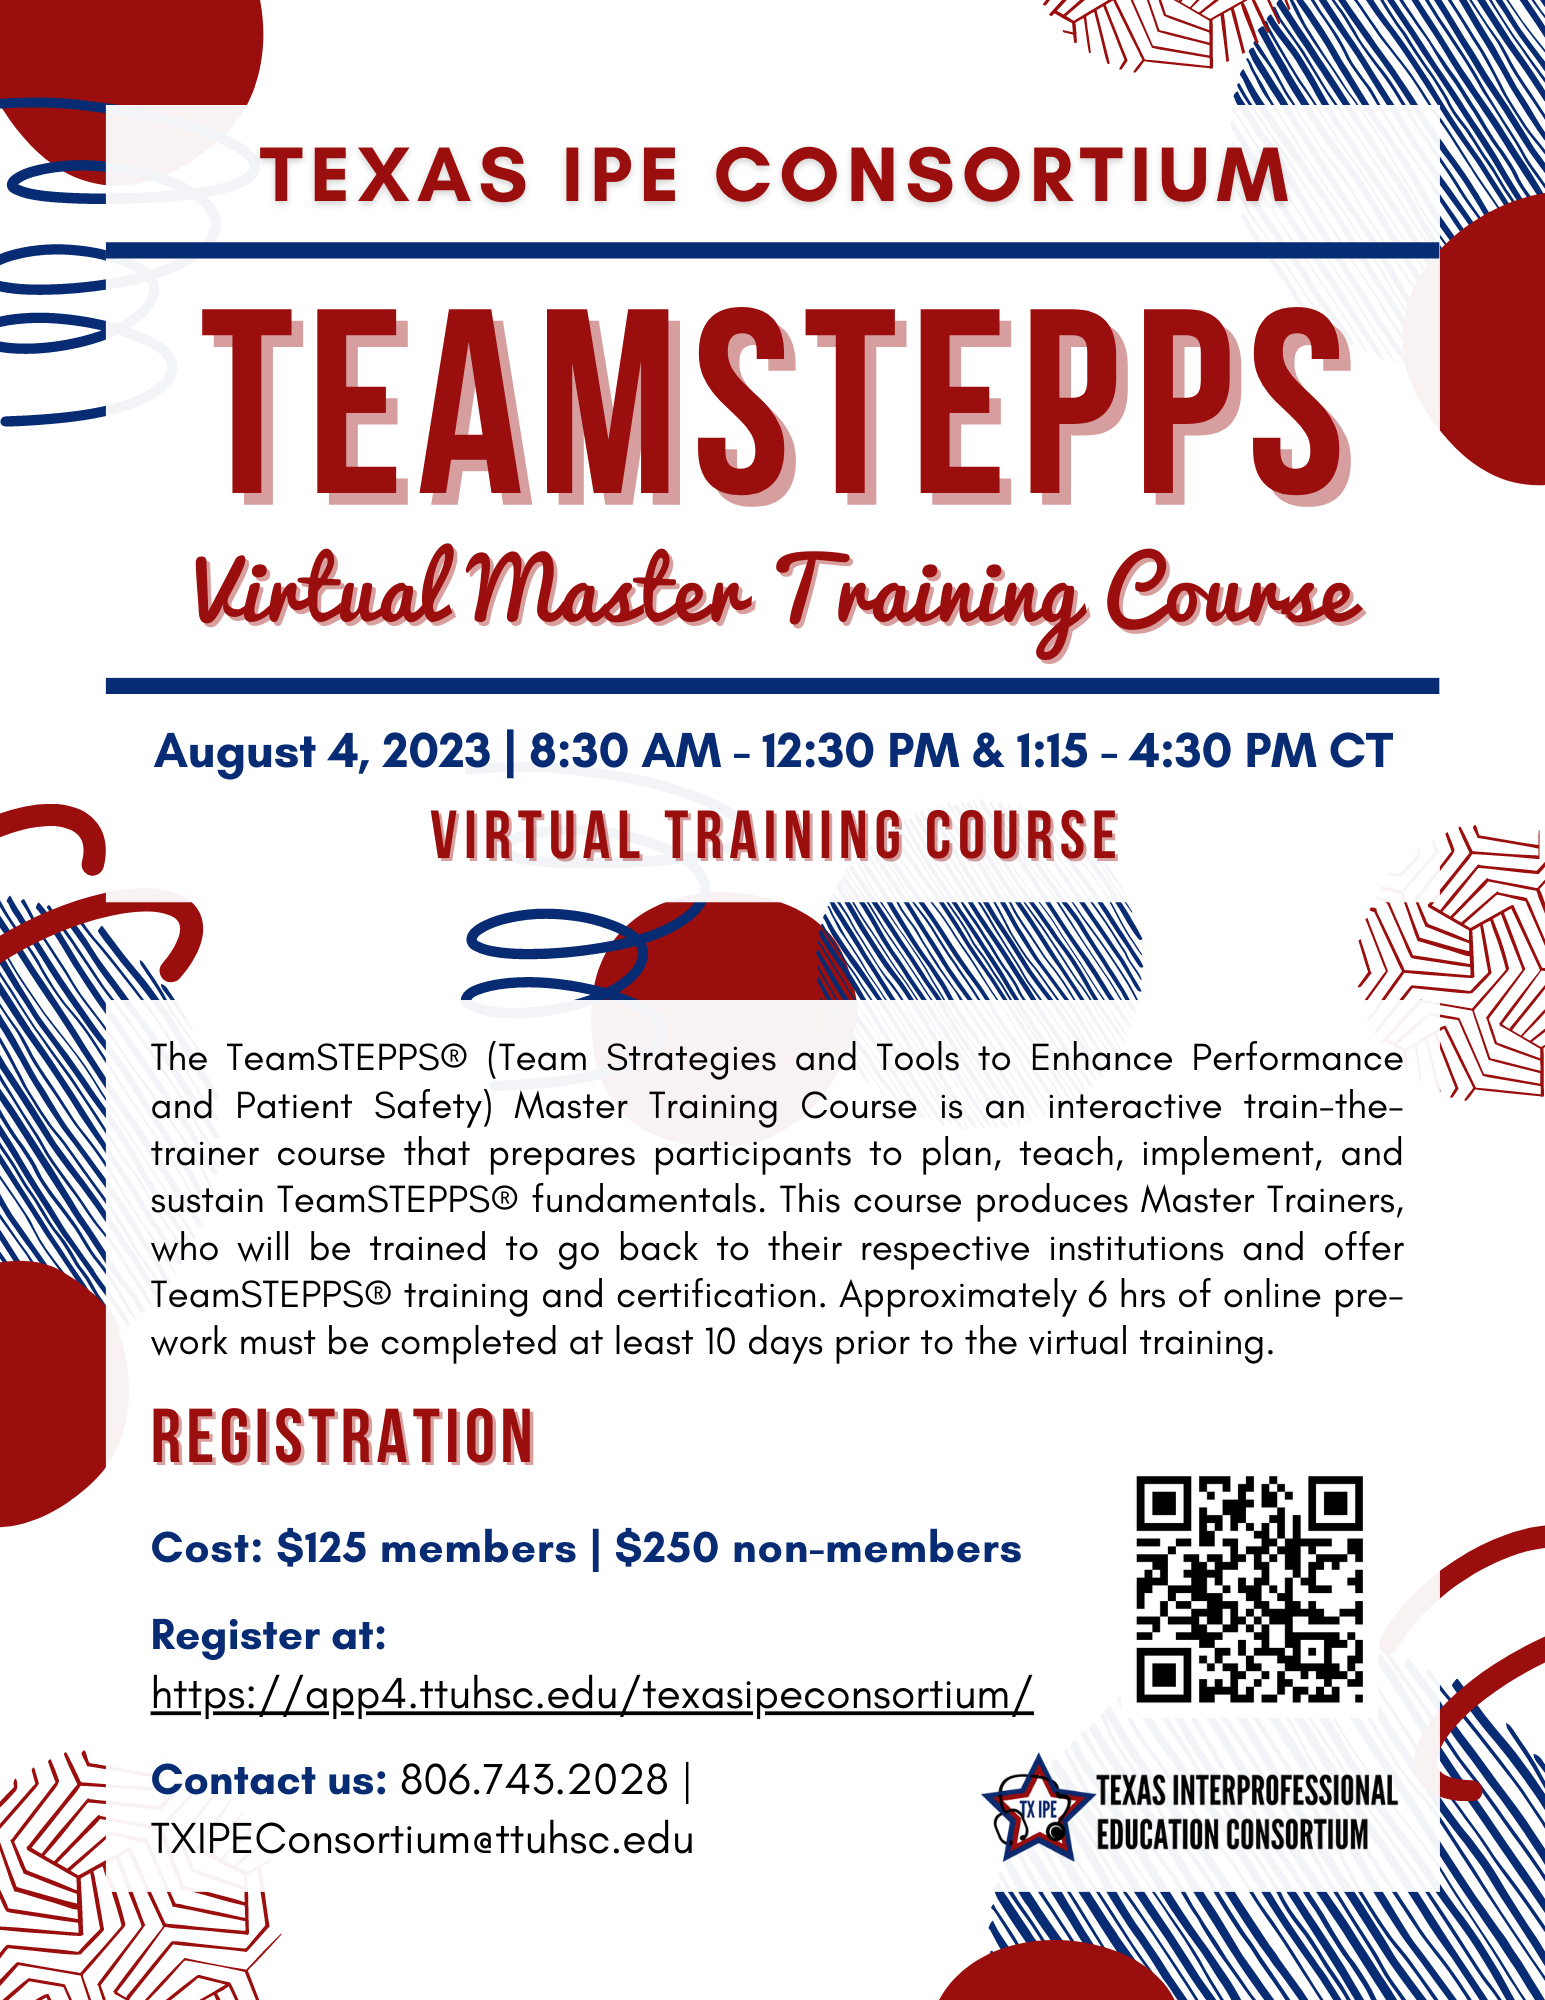 TeamSTEPPS Virtual Master Training Course November 12, 2021 8:30 AM to 4:30 PM CT